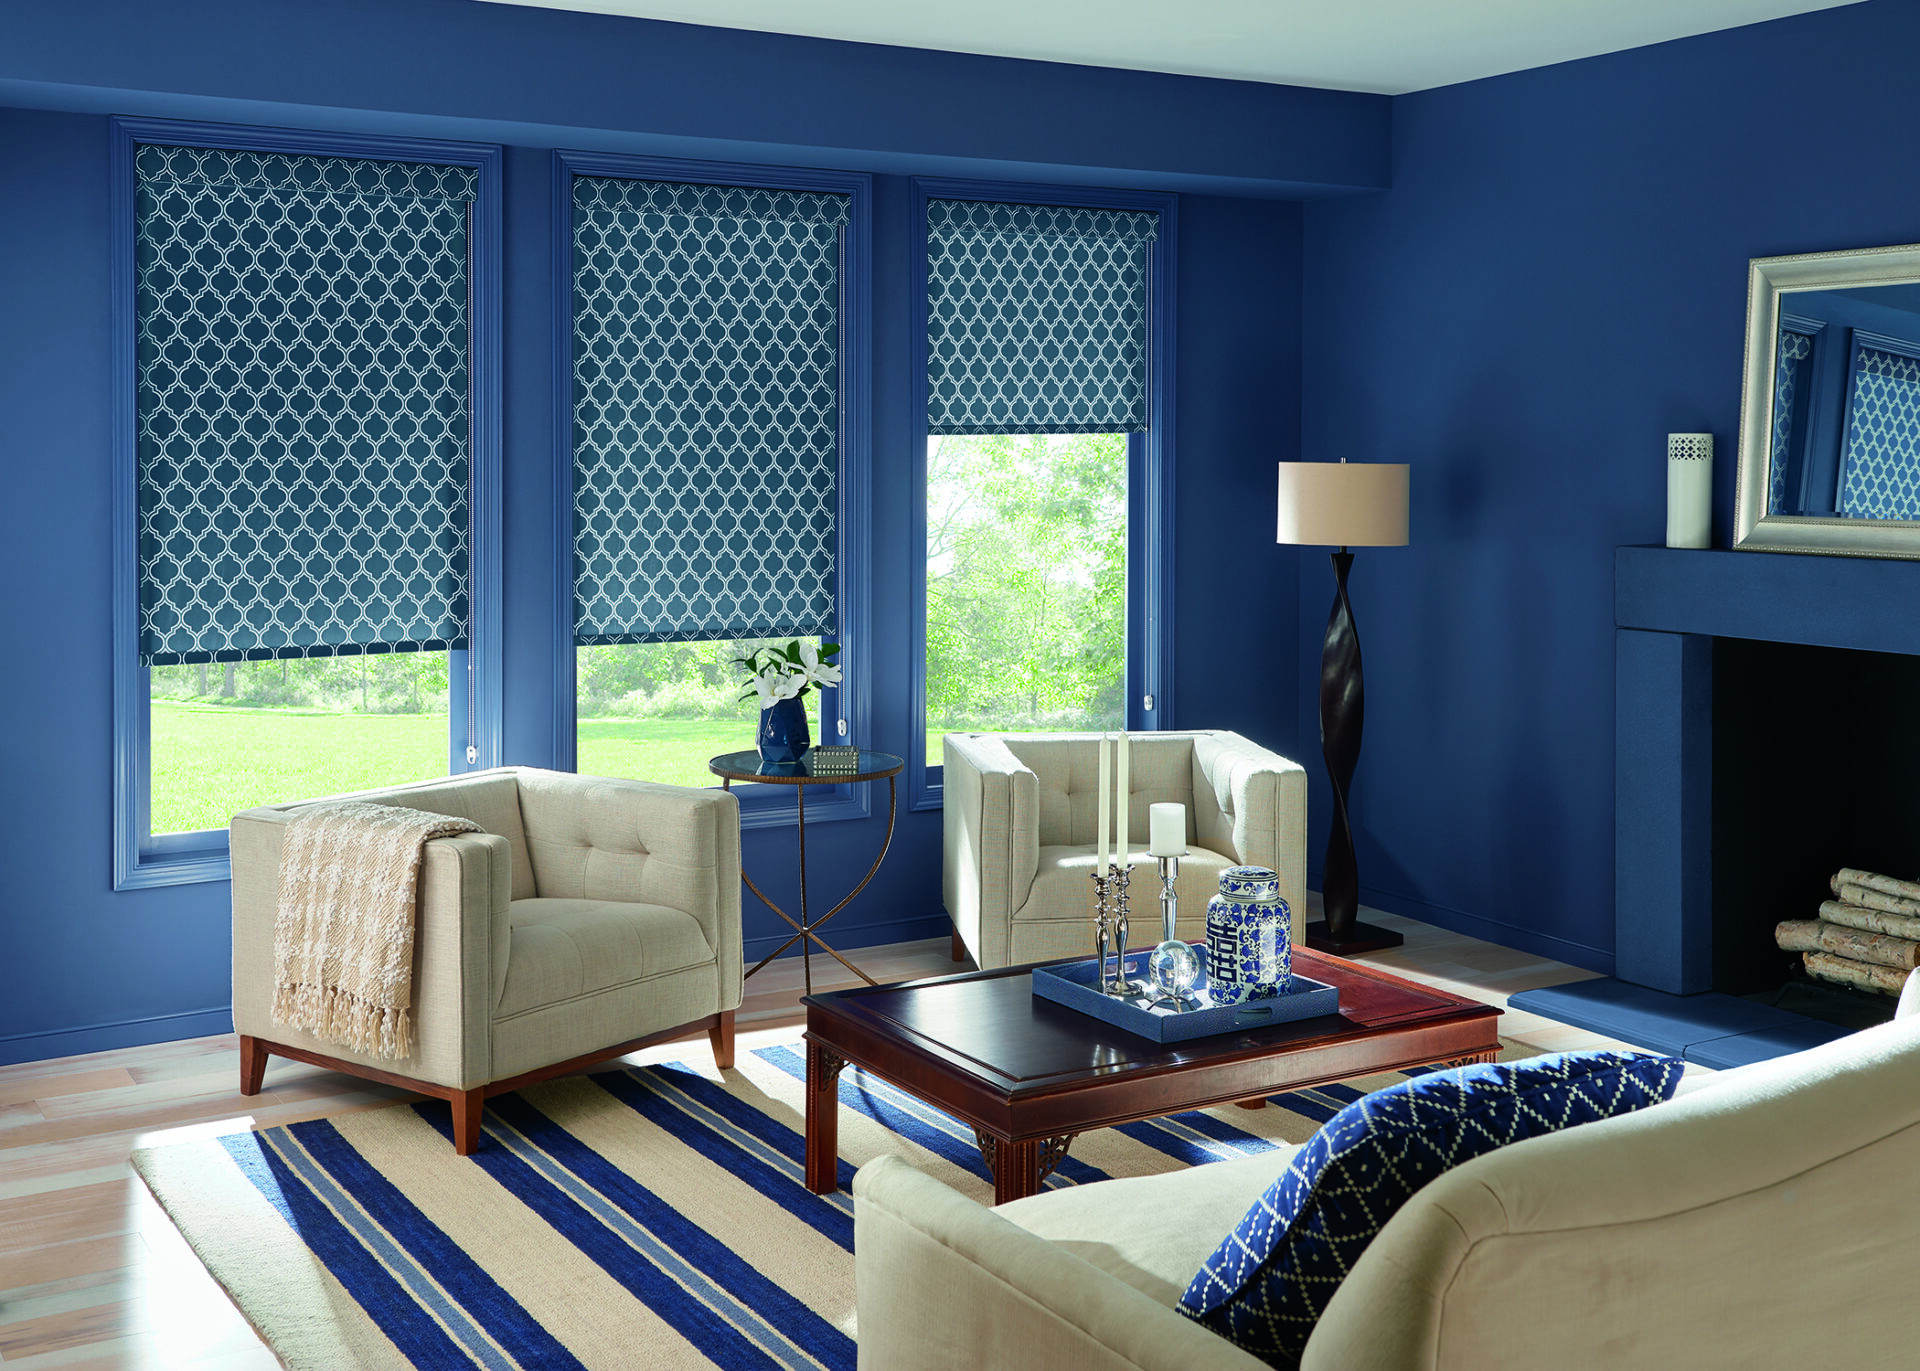 Roller Herald Tsunami Shades - wood blinds and faux wood blinds - exterior, motorized window treatments in Nashville | Dynamic Delivery Blinds